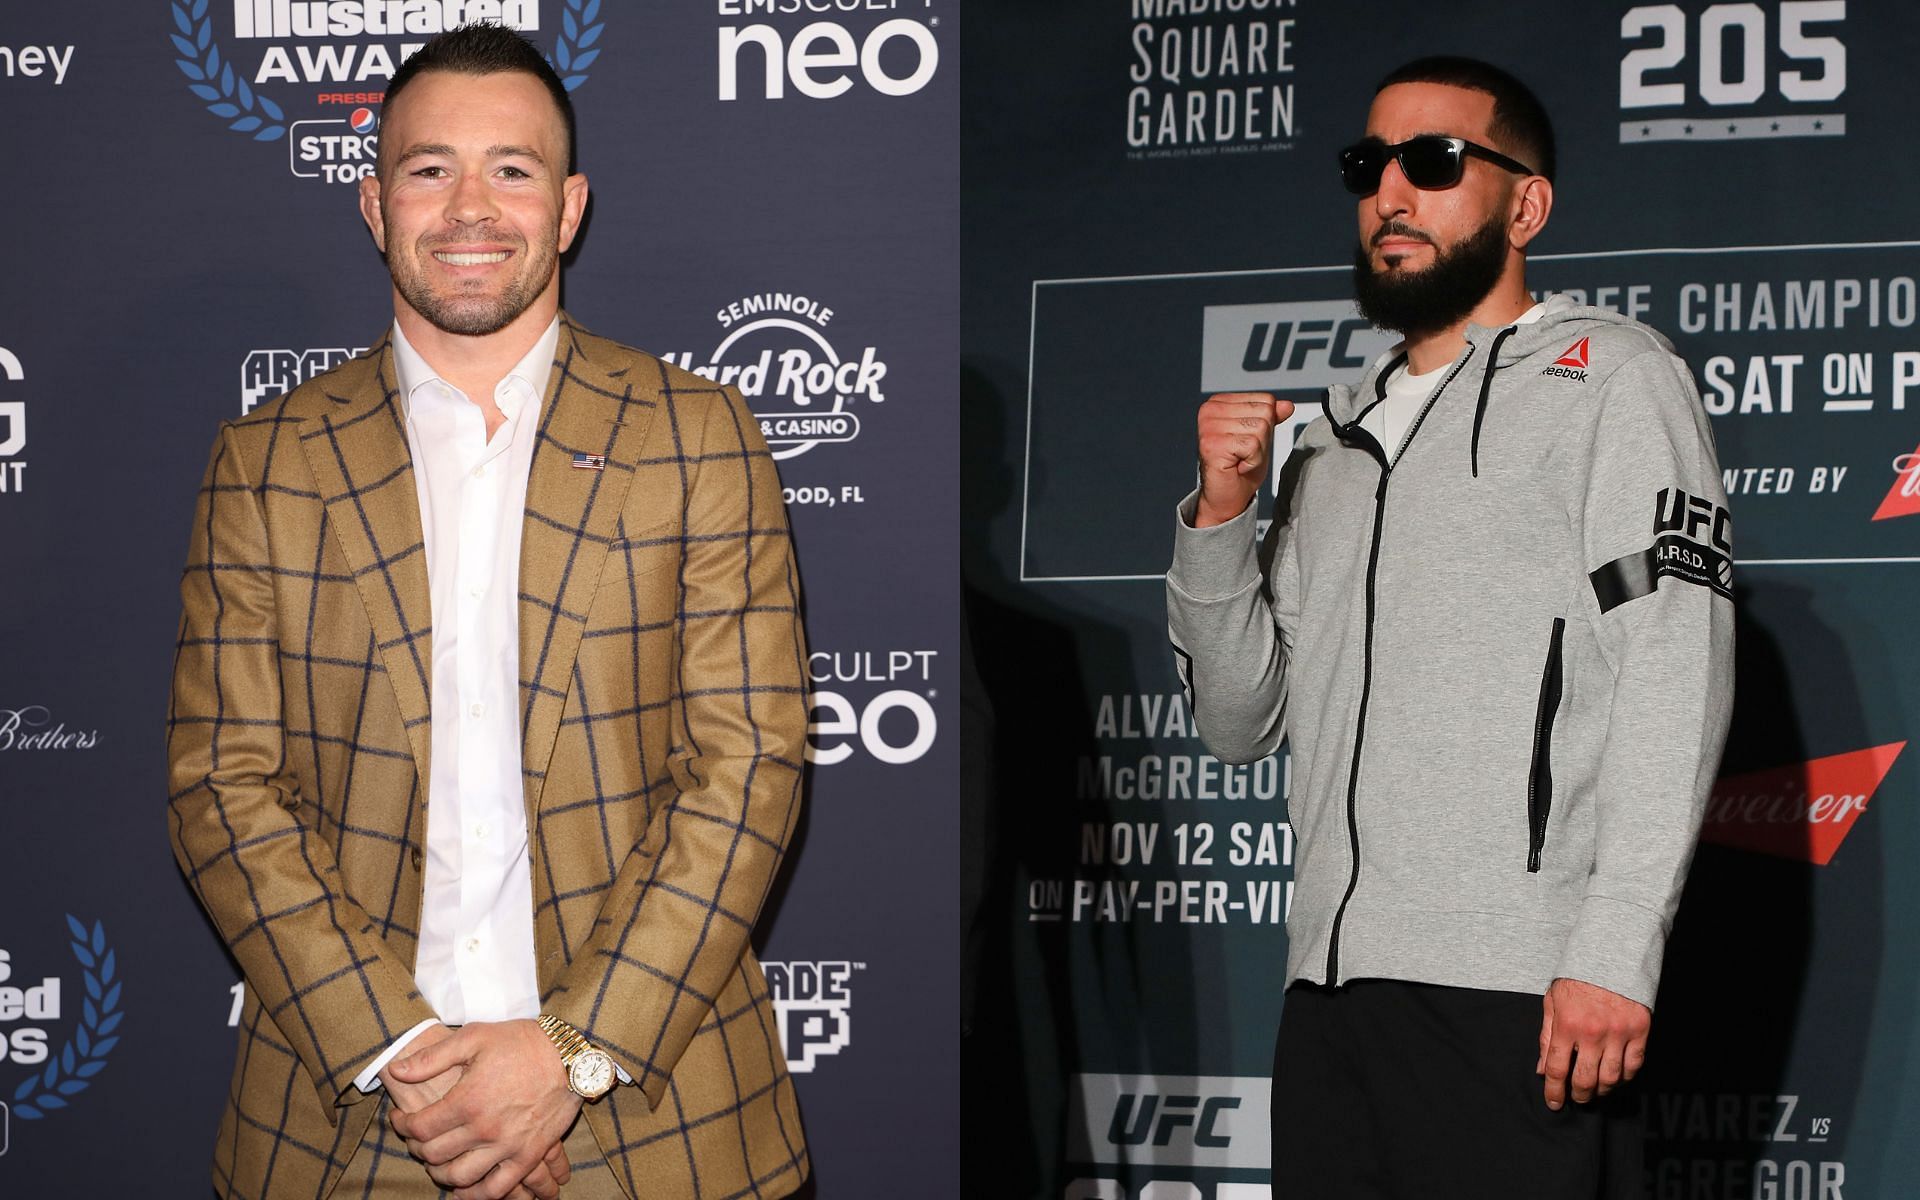 UFC welterweight contenders Colby Covington (left) and Belal Muhammad (right)